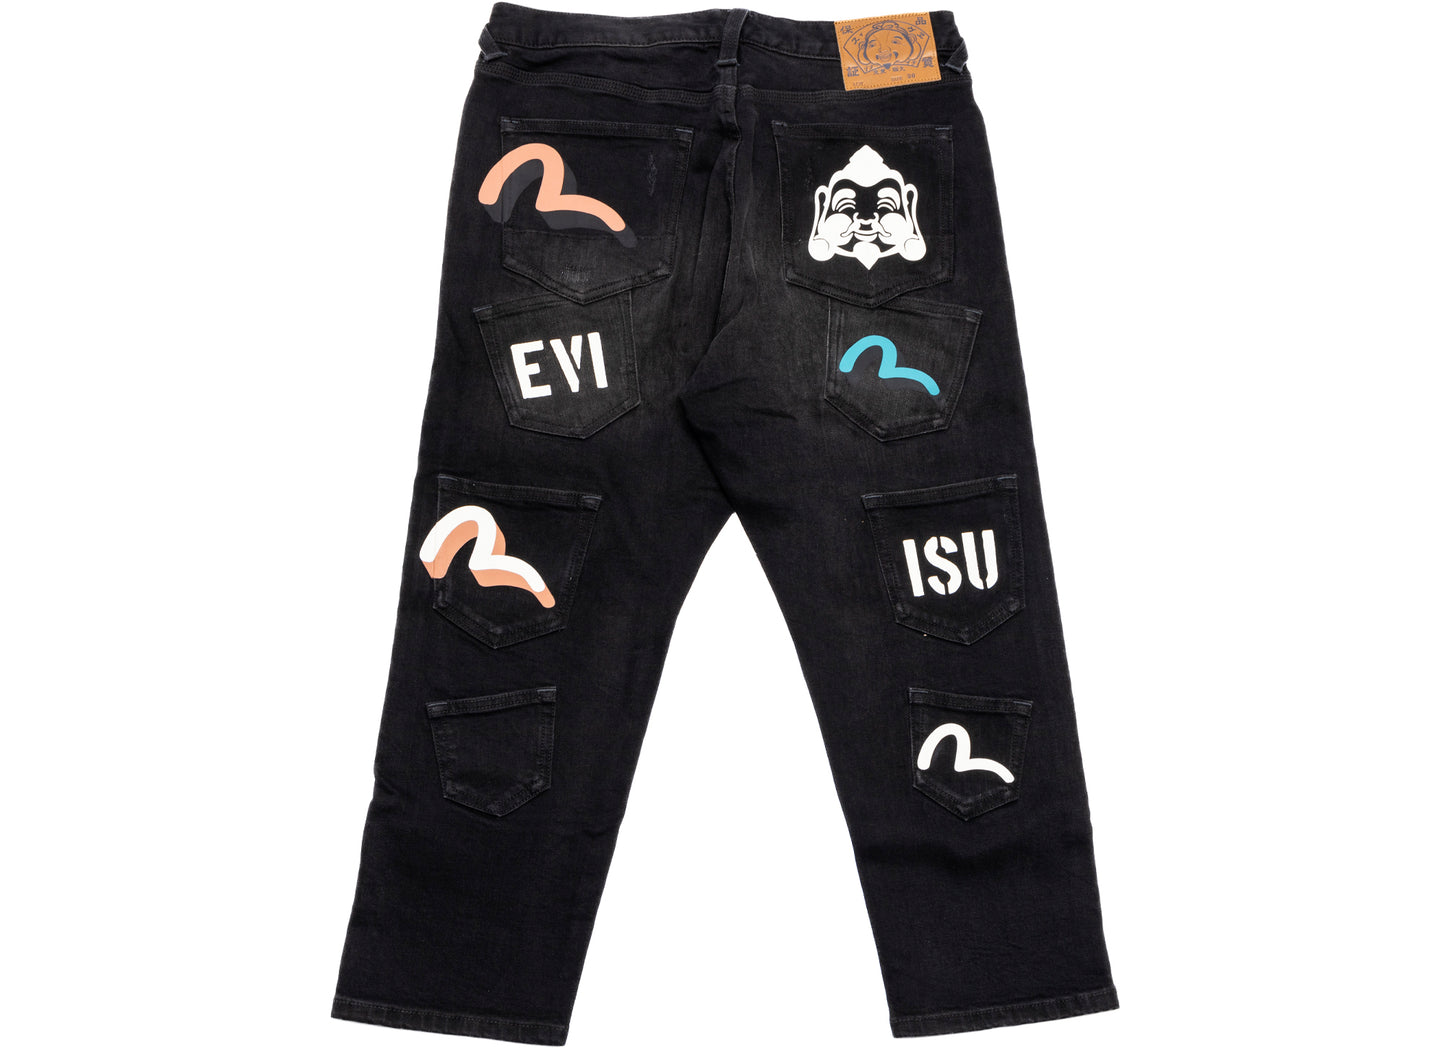 Evisu Multi-Pocket and Multi-Print Cropped Fit Jeans xld